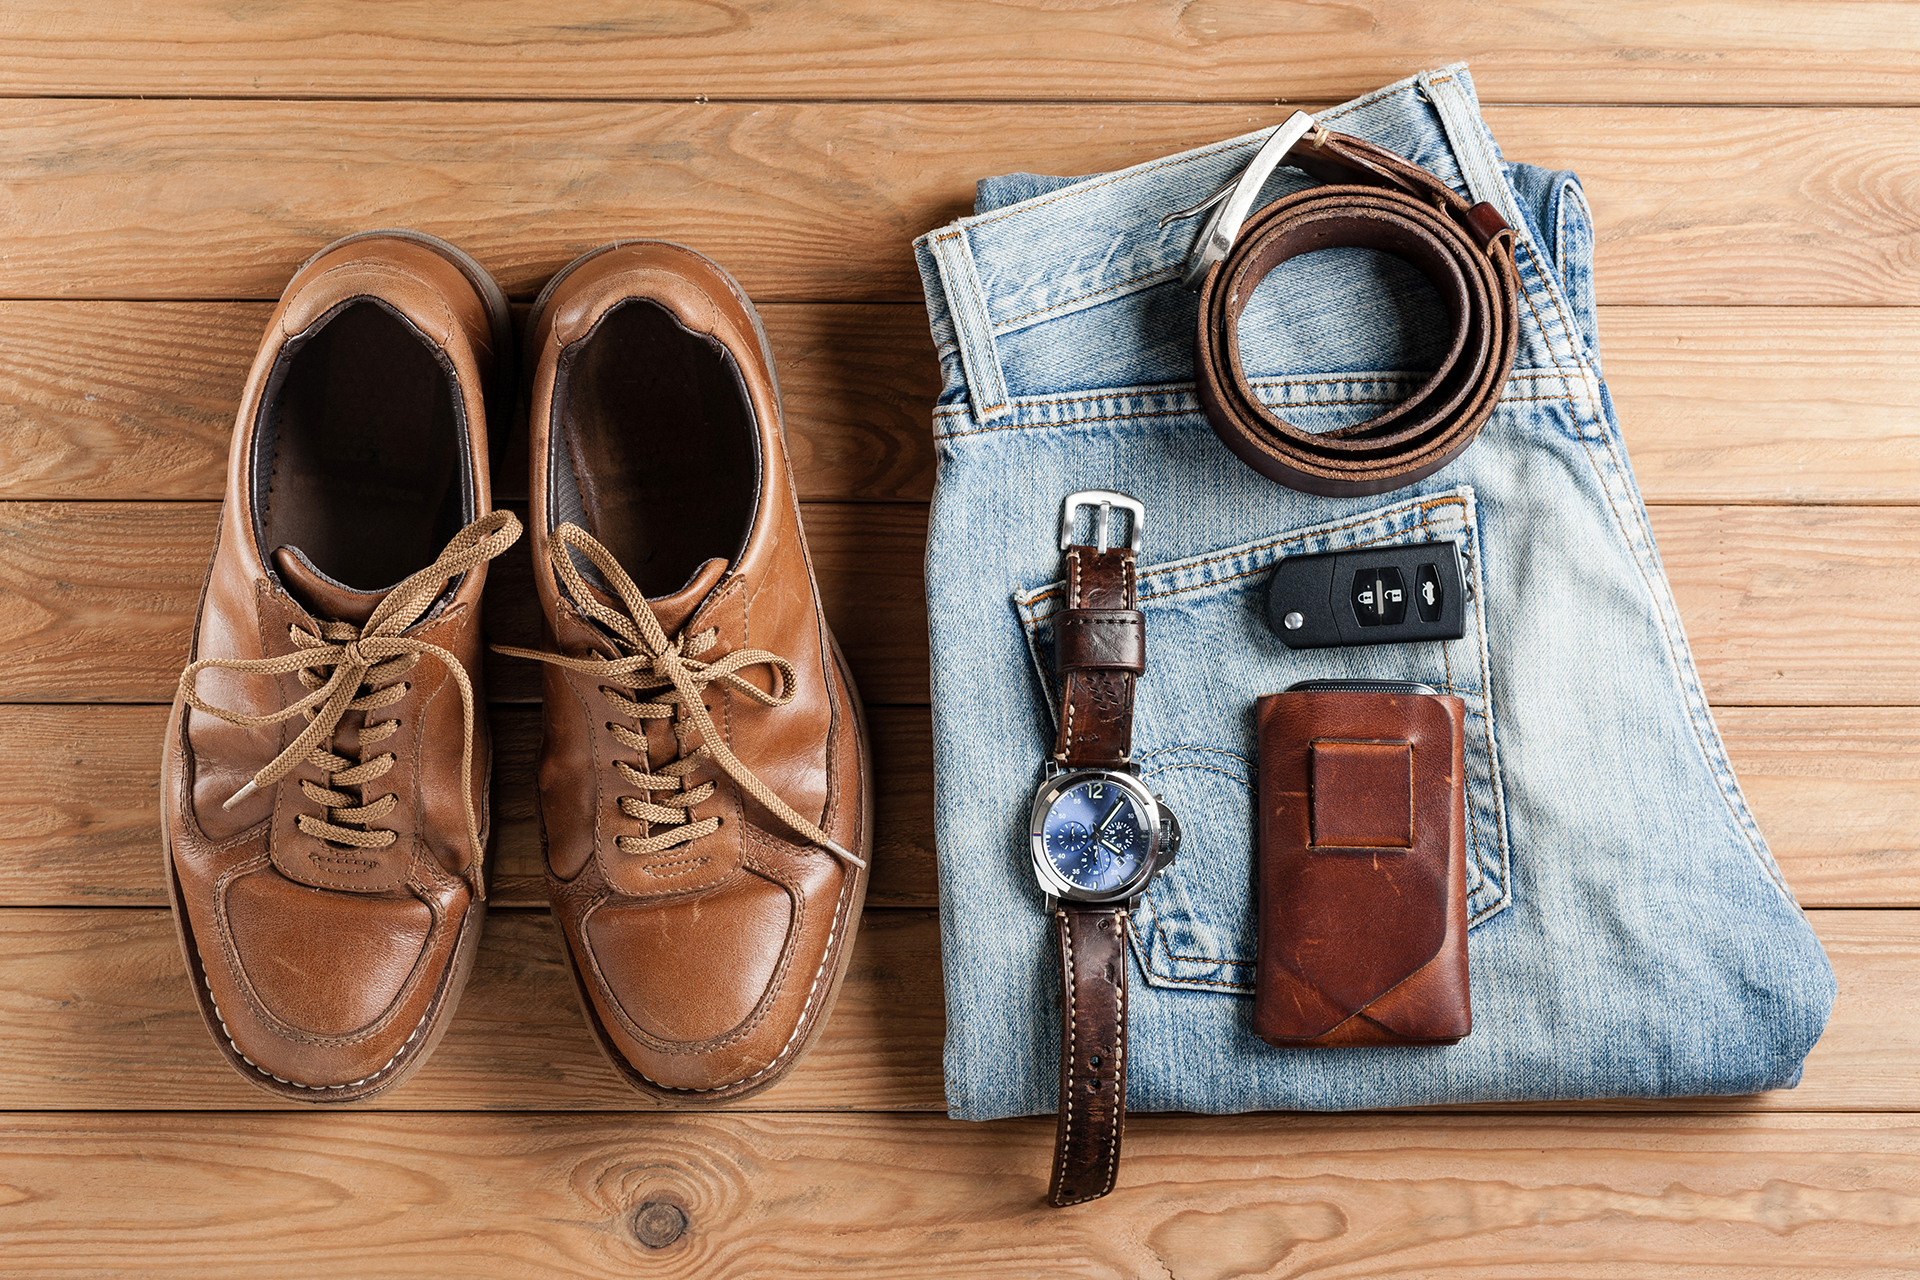 Complete outfit with blue jeans and brown shoes